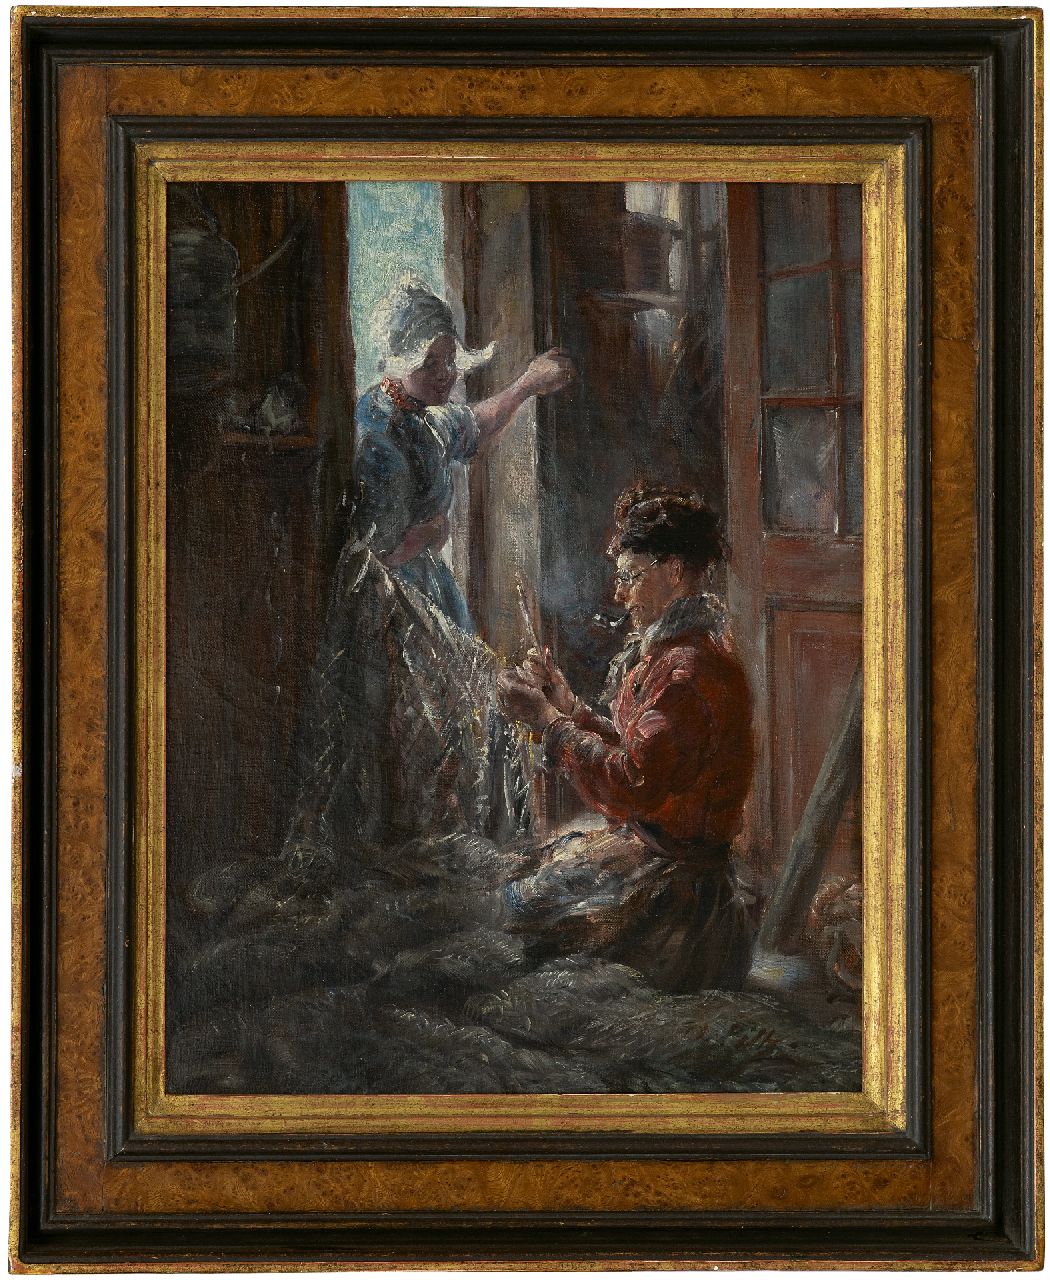 Piltz O.  | Otto Piltz | Paintings offered for sale | Repairing the nets, Volendam, oil on canvas 45.6 x 36.4 cm, signed l.r. and painted ca. 1909